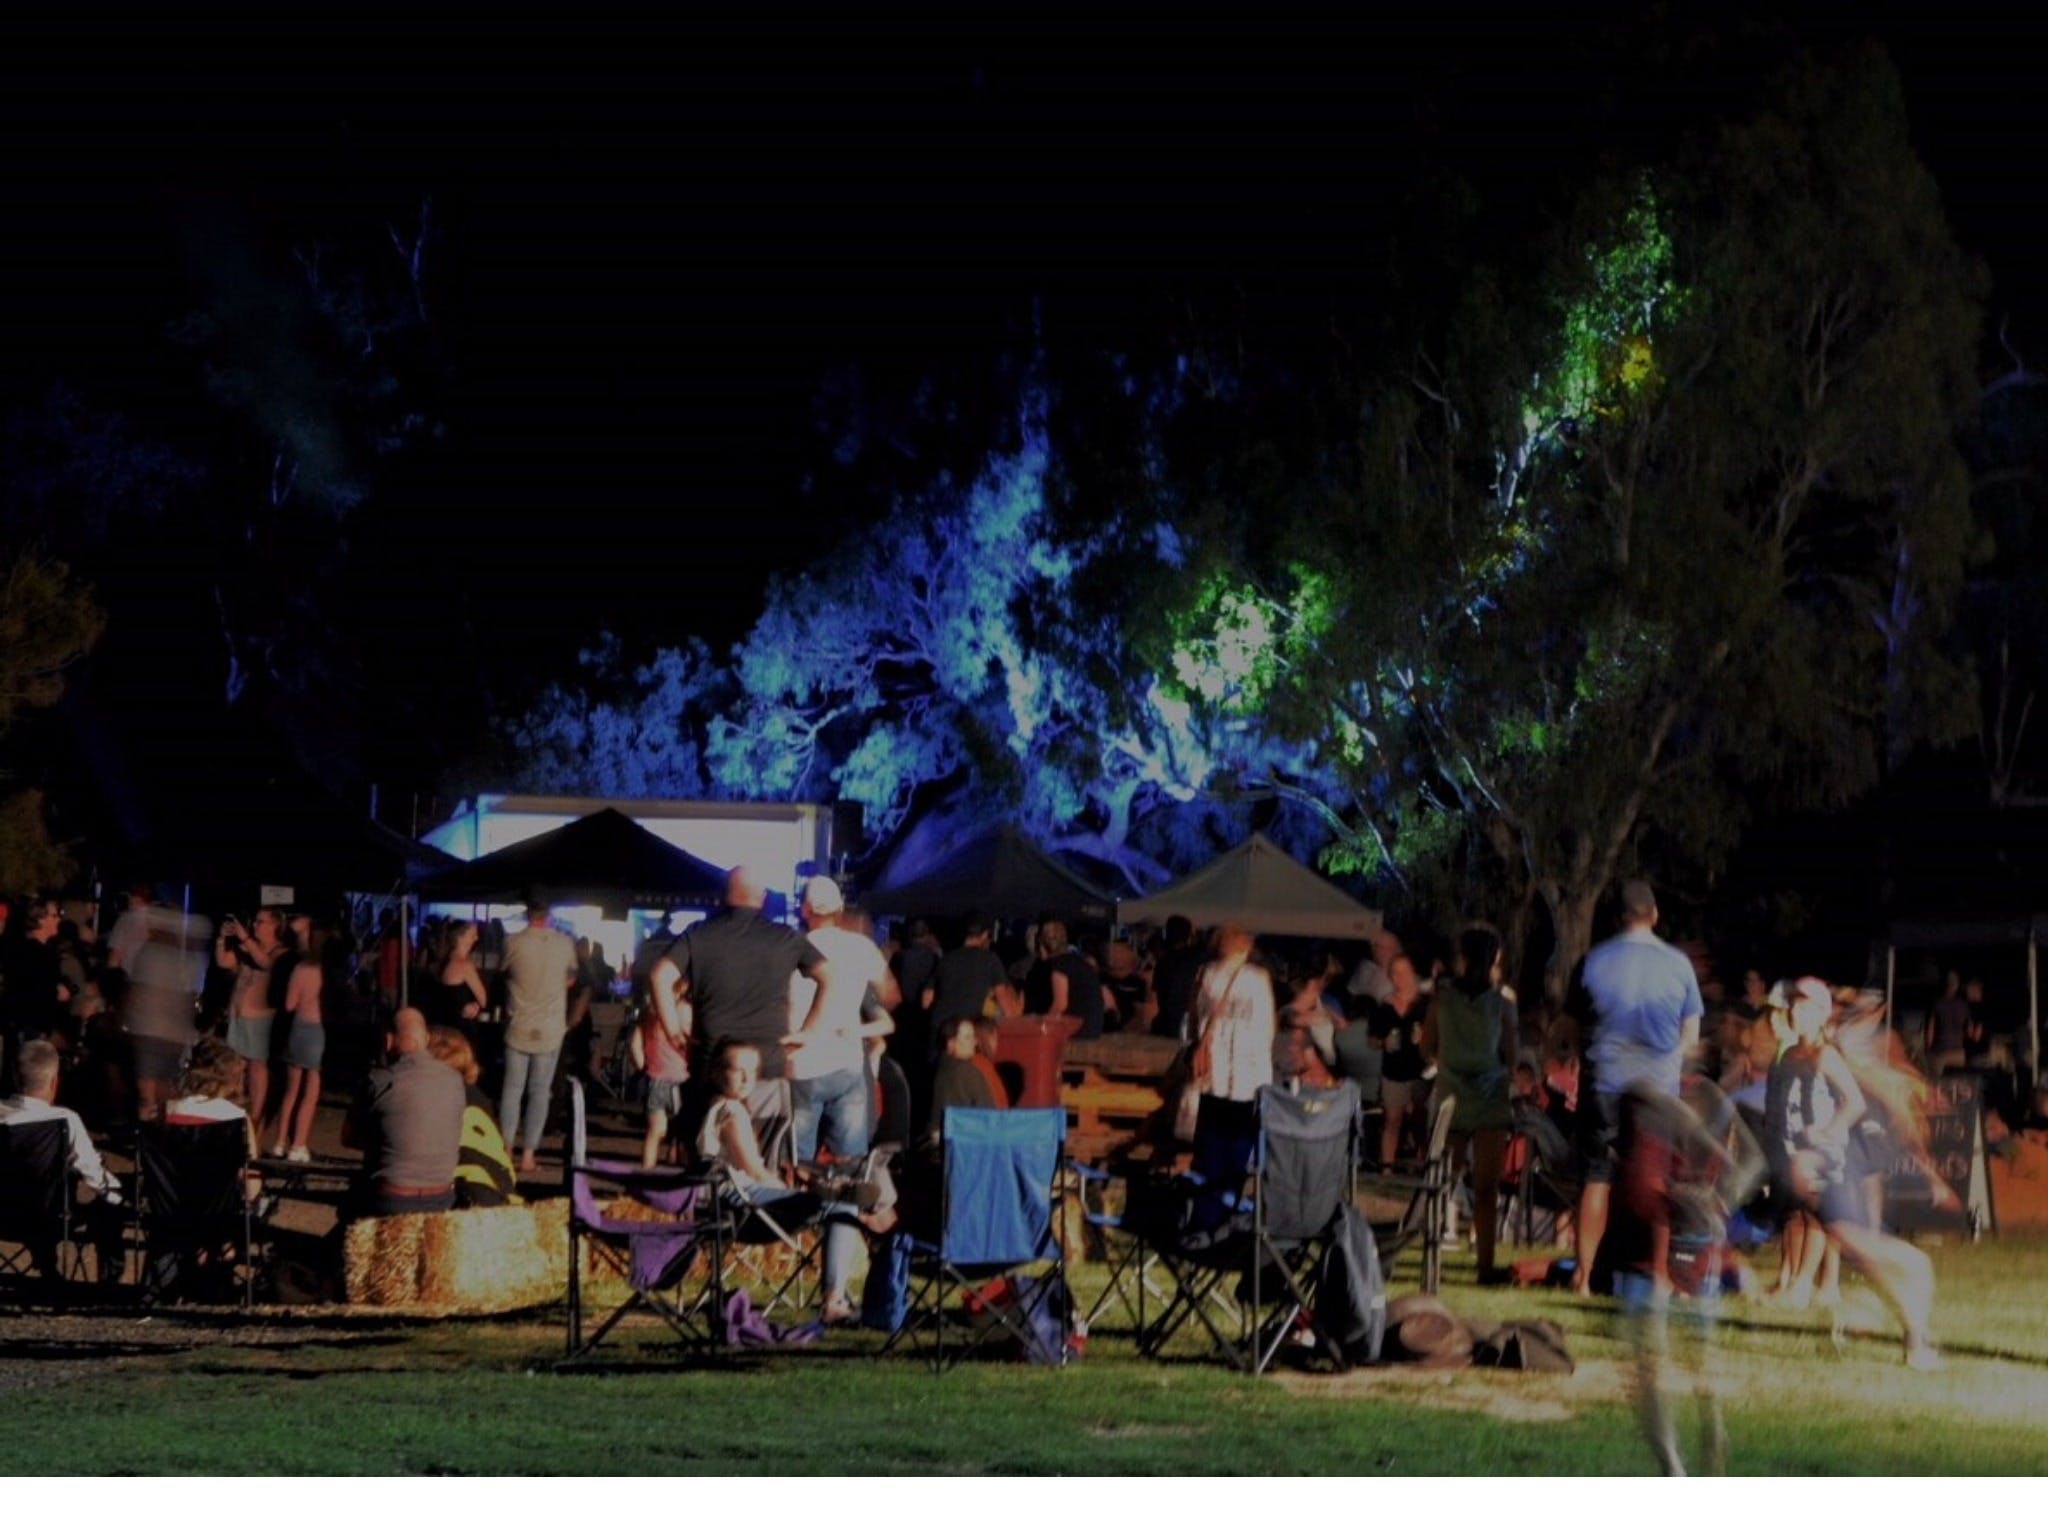 New Year's Eve by the River - Accommodation Mount Tamborine